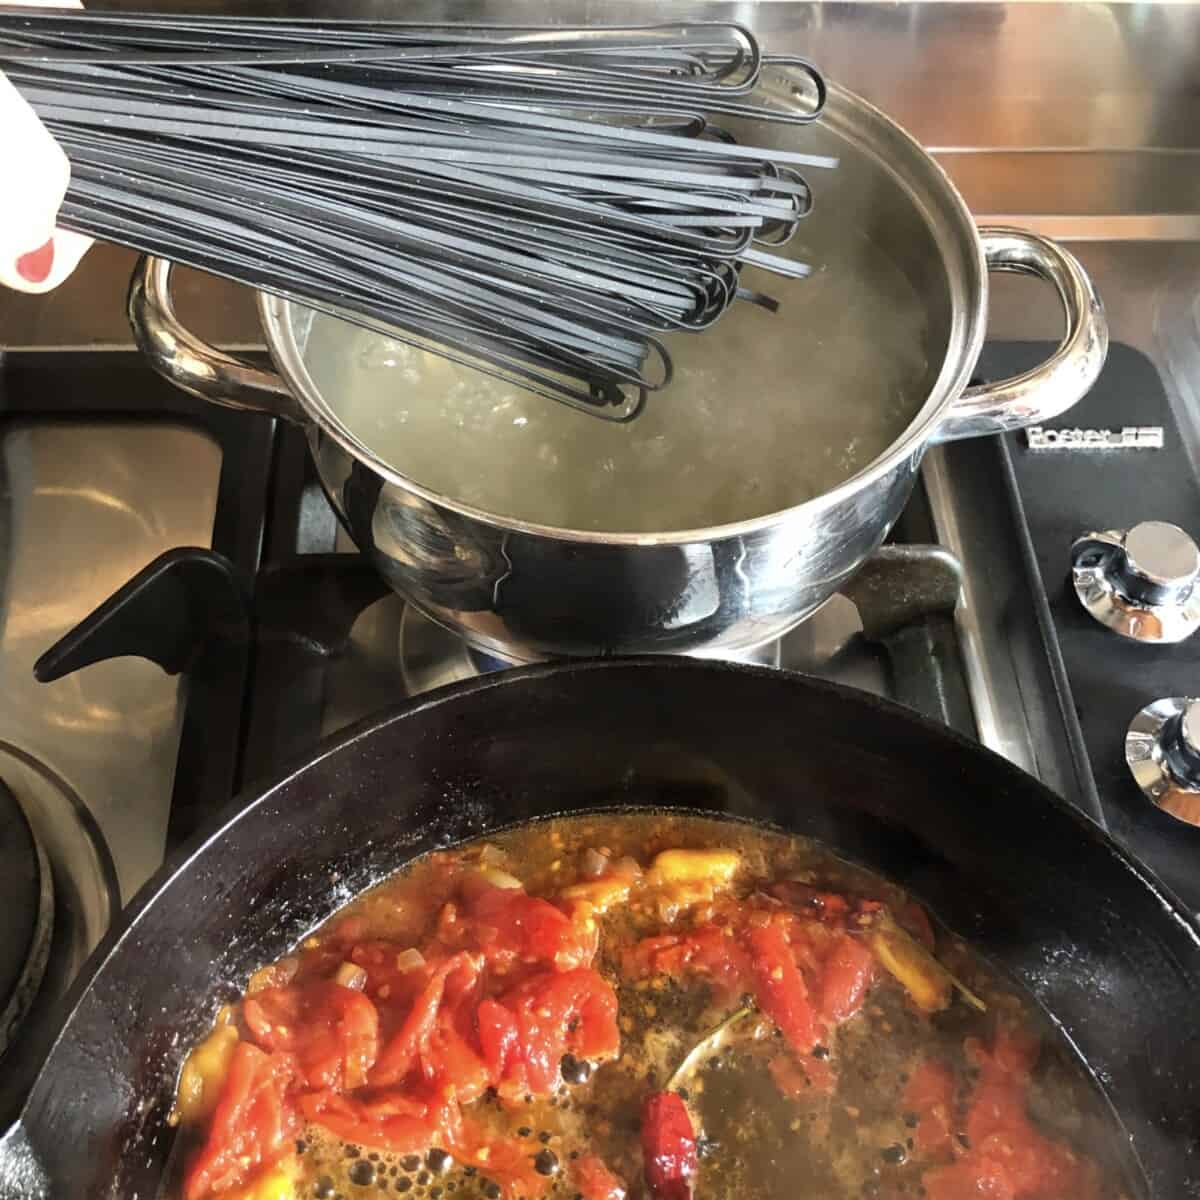 Adding black pasta to a pot of boiling water with the crab sauce cooking in the foreground.